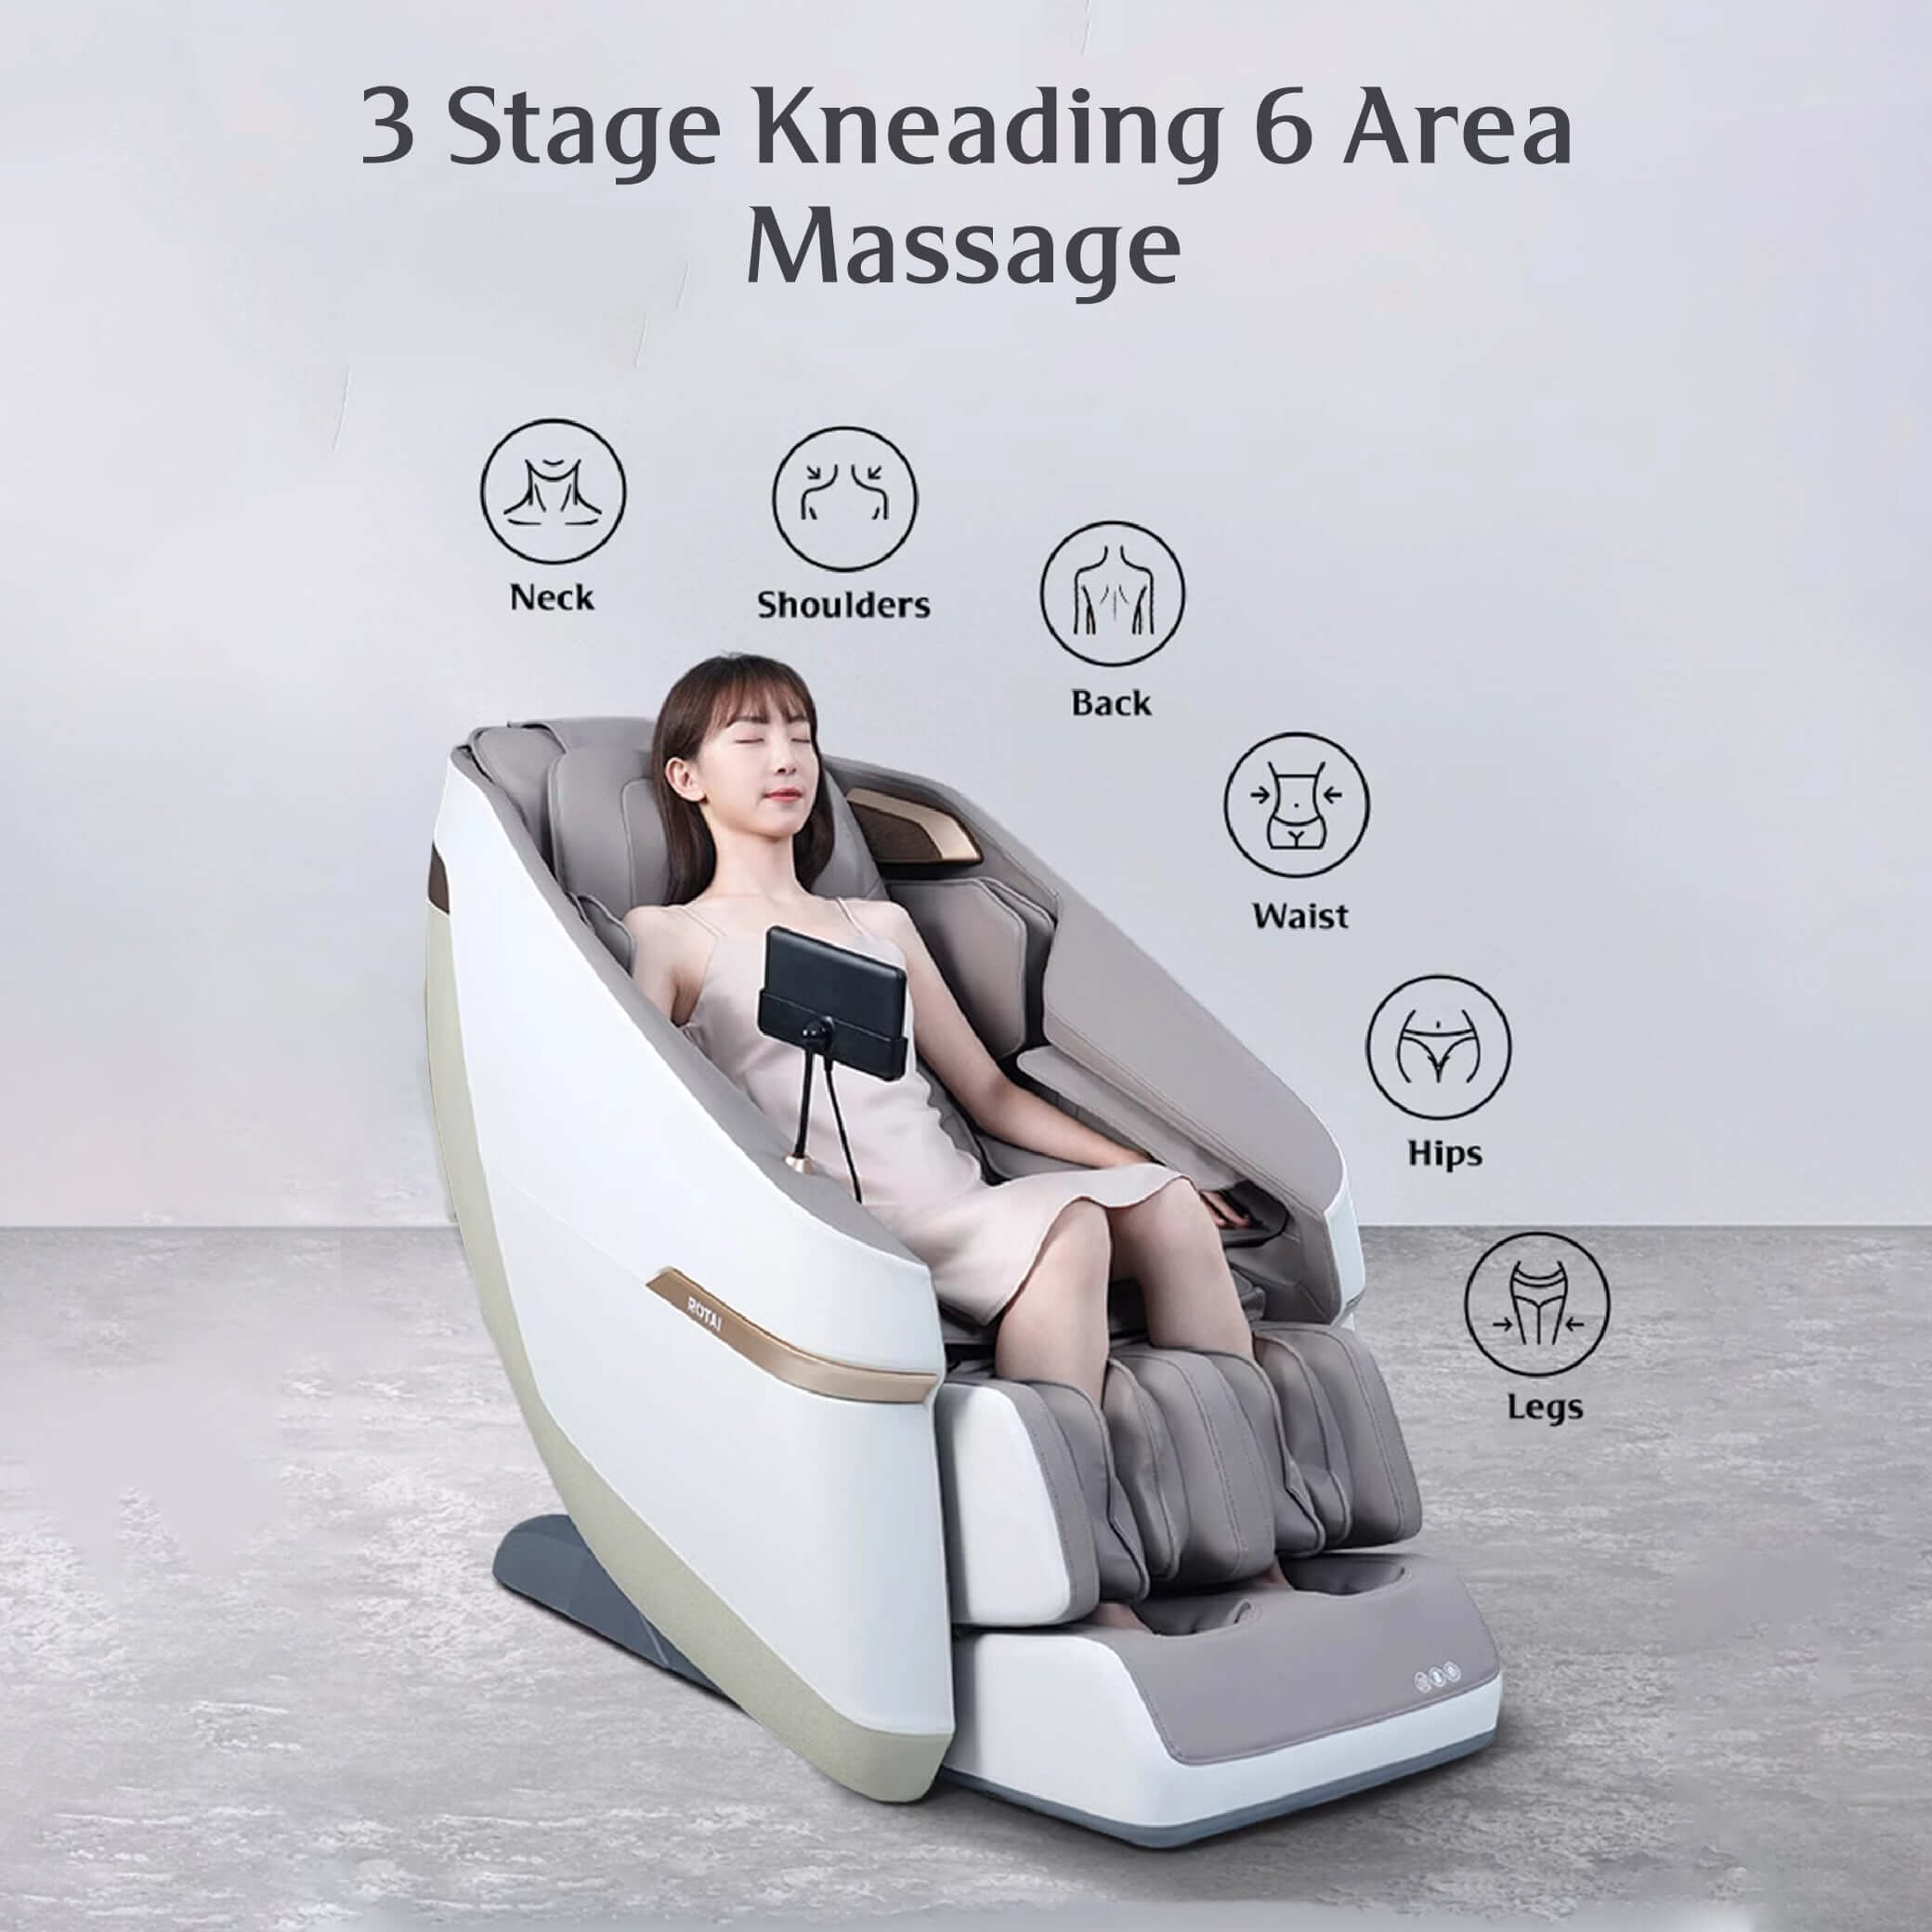 Woman relaxing in a Jimny Massage Chair demonstrating 3 stage kneading and 6 area massage for neck, shoulders, back, waist, hips, and legs, best massage chair uae, massage chair Dubai, massage chair uae, massage chair Saudi Arabia, كرسي التدليك, Best mass